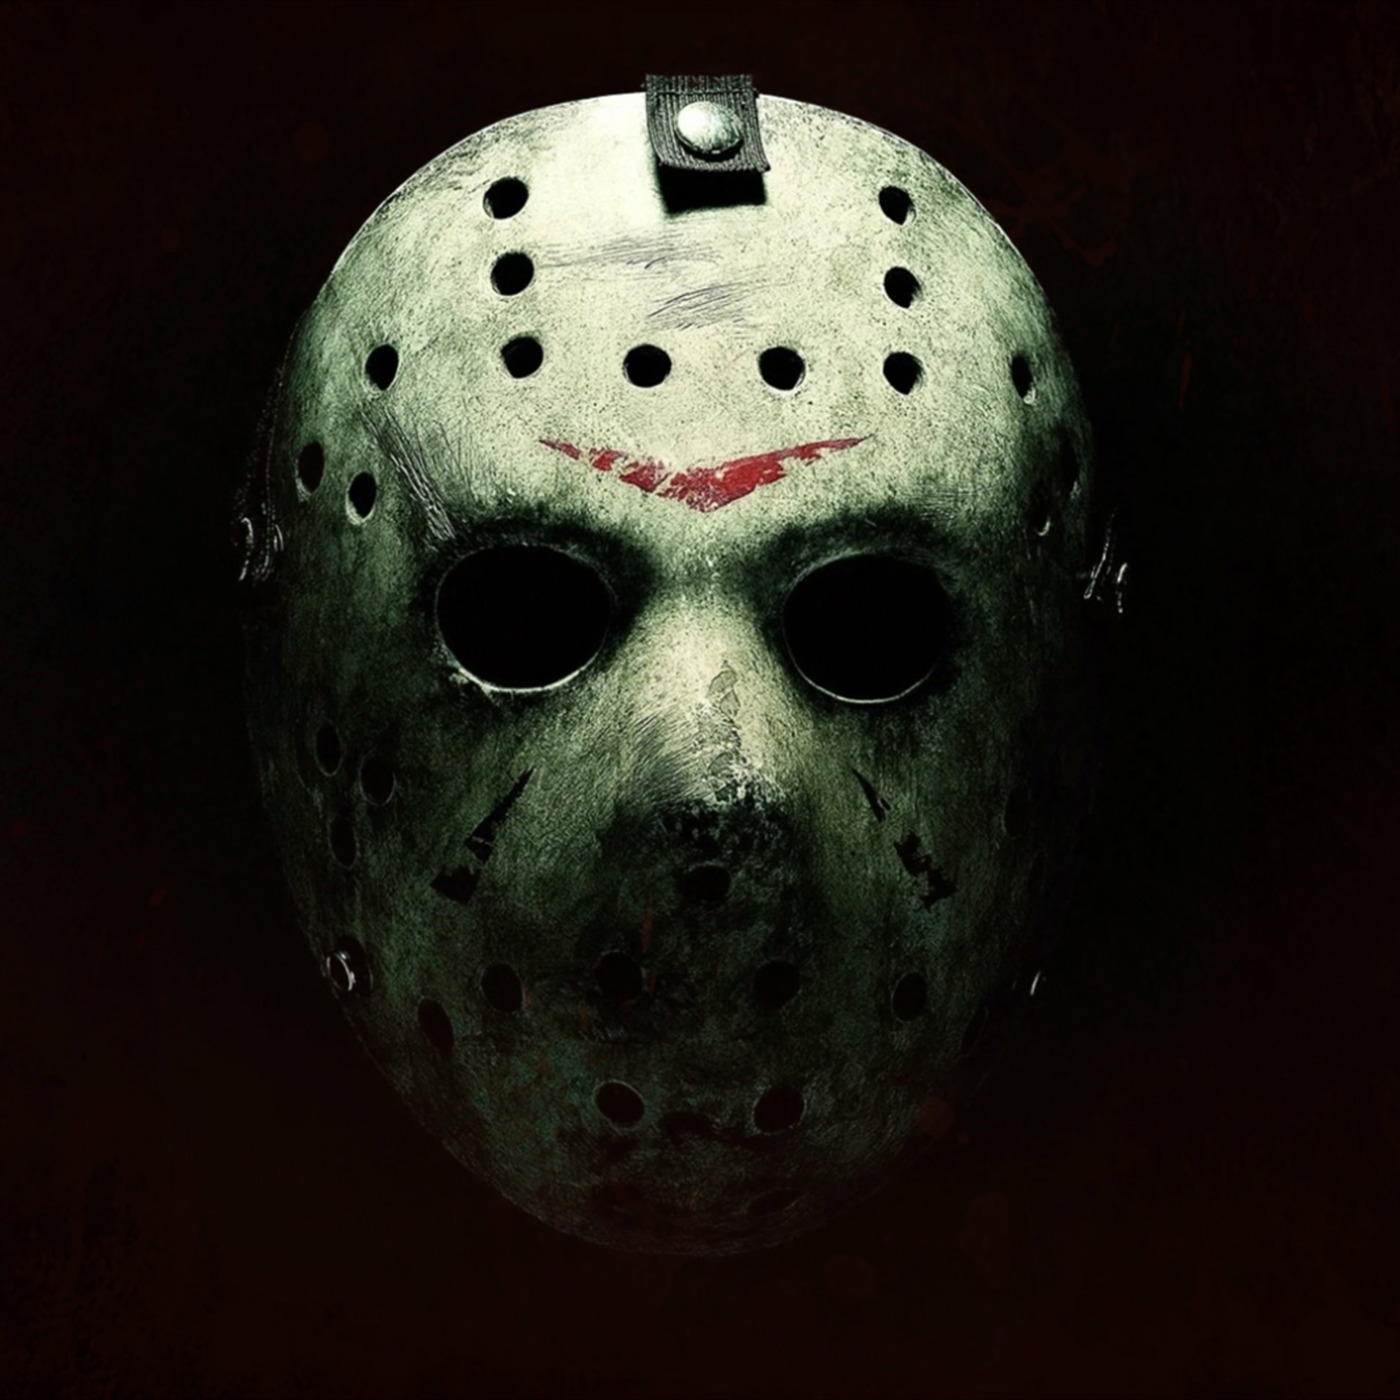 Episode 261: Friday The 13th Franchise 1980 to 2009